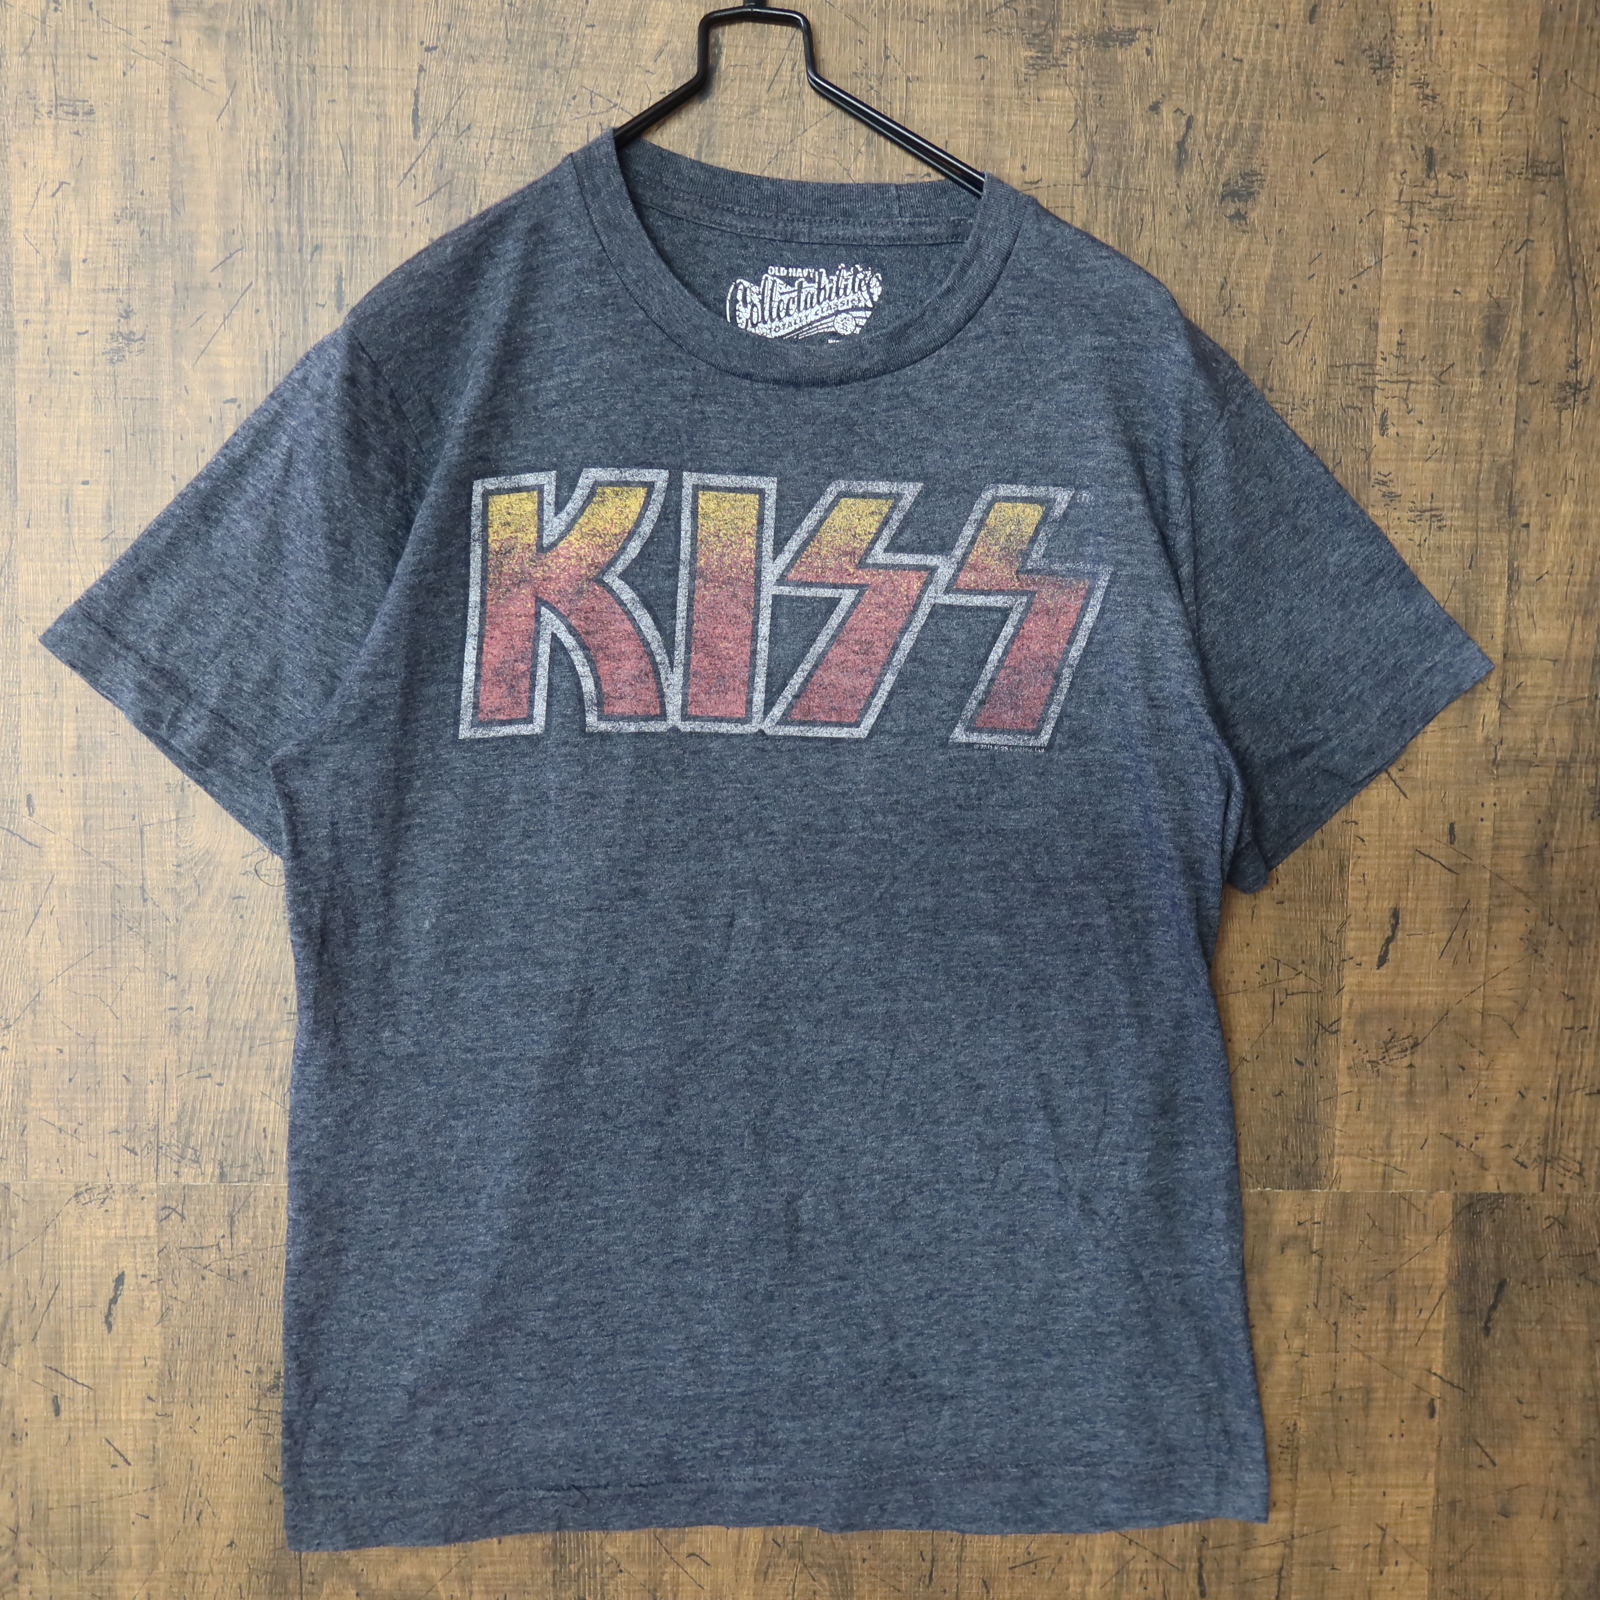 00s～ Vintage US古着☆KISS キス 半袖 ロゴ プリント Tシャツ SIZE S 